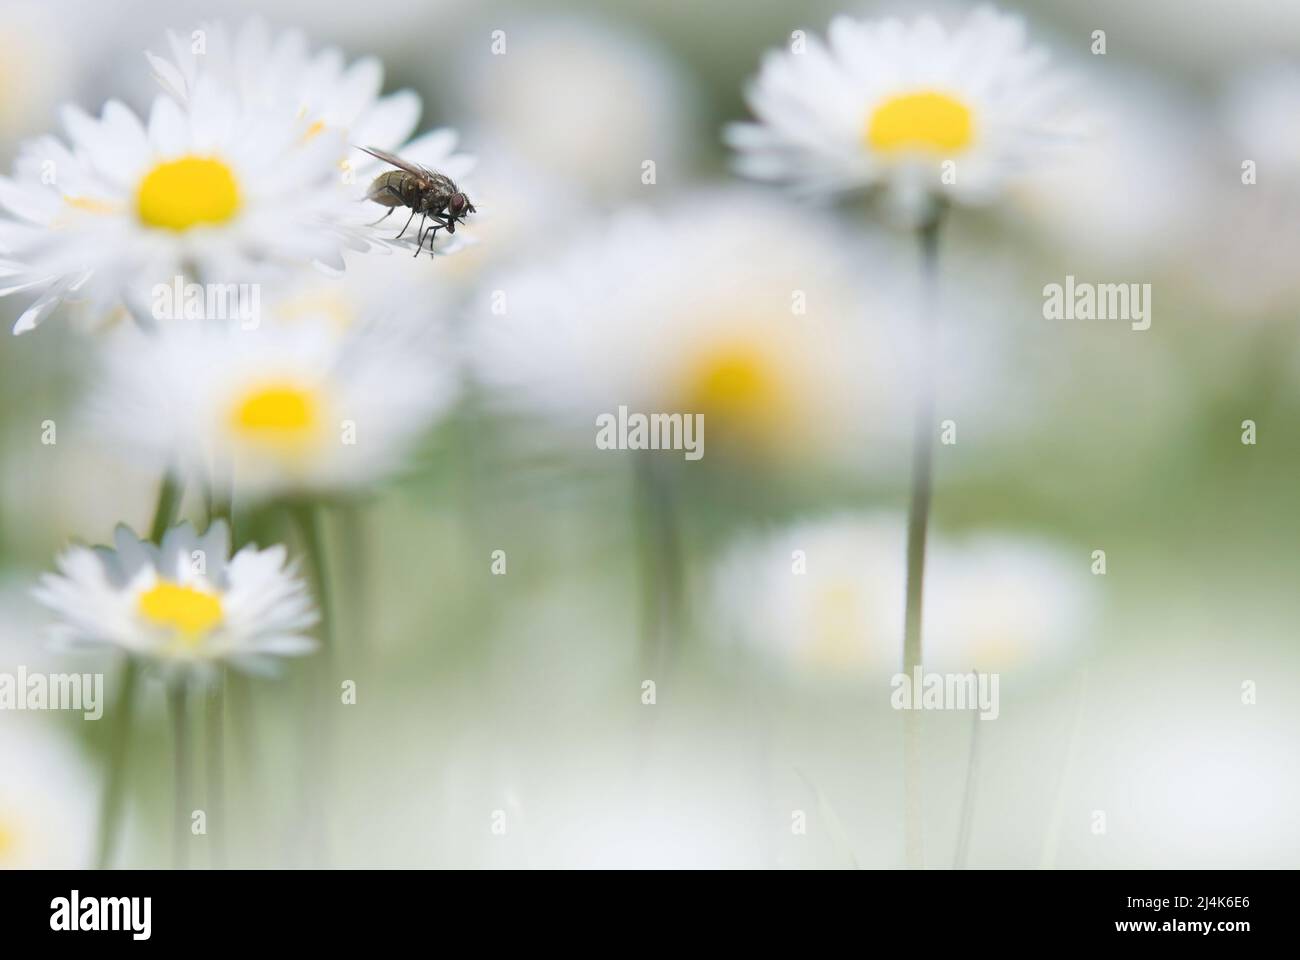 Fly resting on daisy (Bellis perennis). White flowers in the garden. Focus on fly, shallow depth of field, blurred background and foreground. Stock Photo